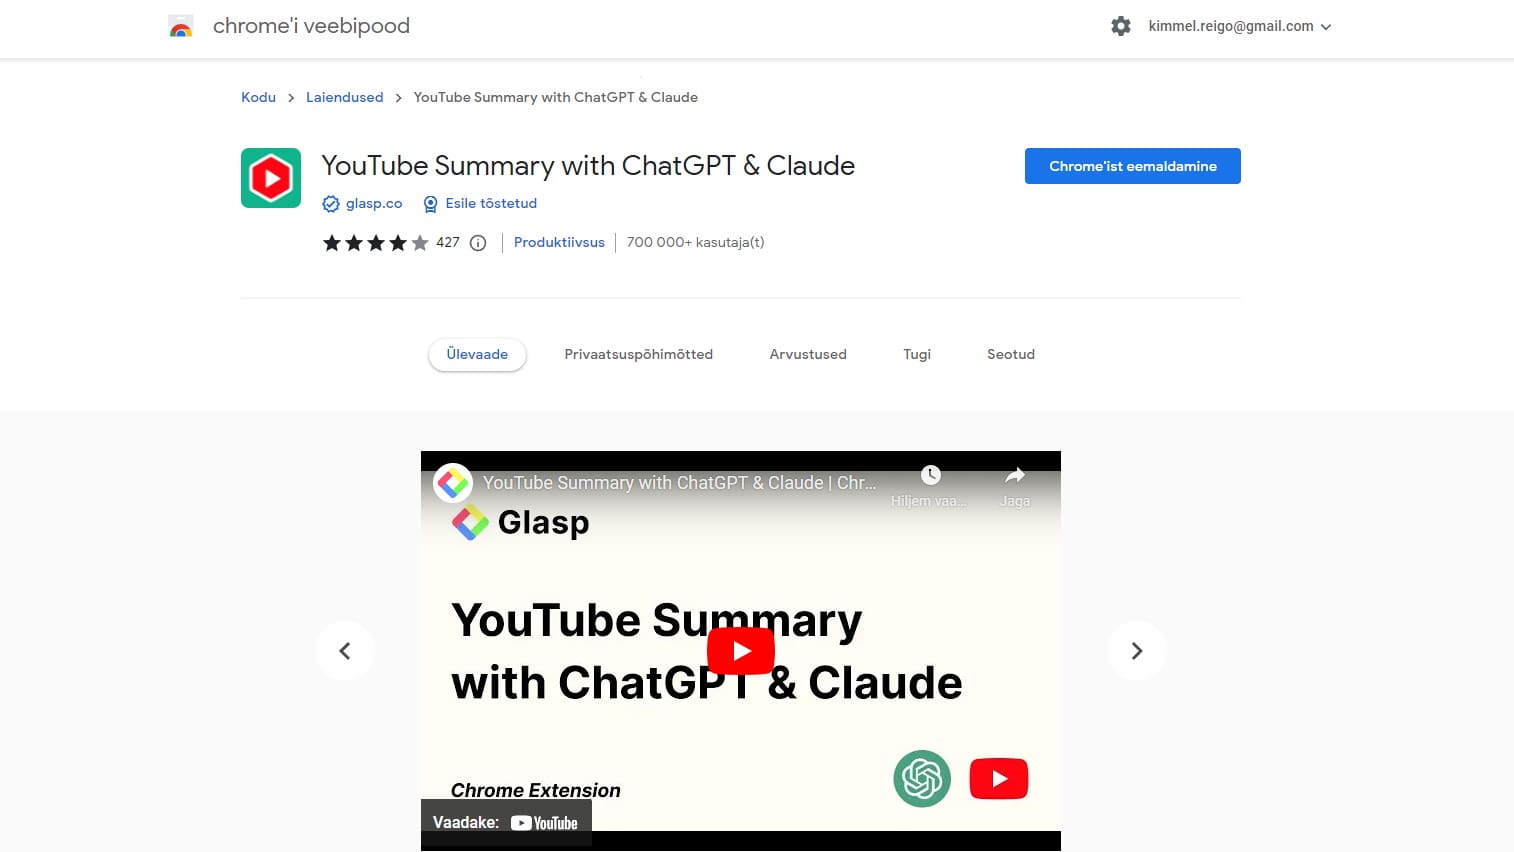 YouTube summary with ChatGPT